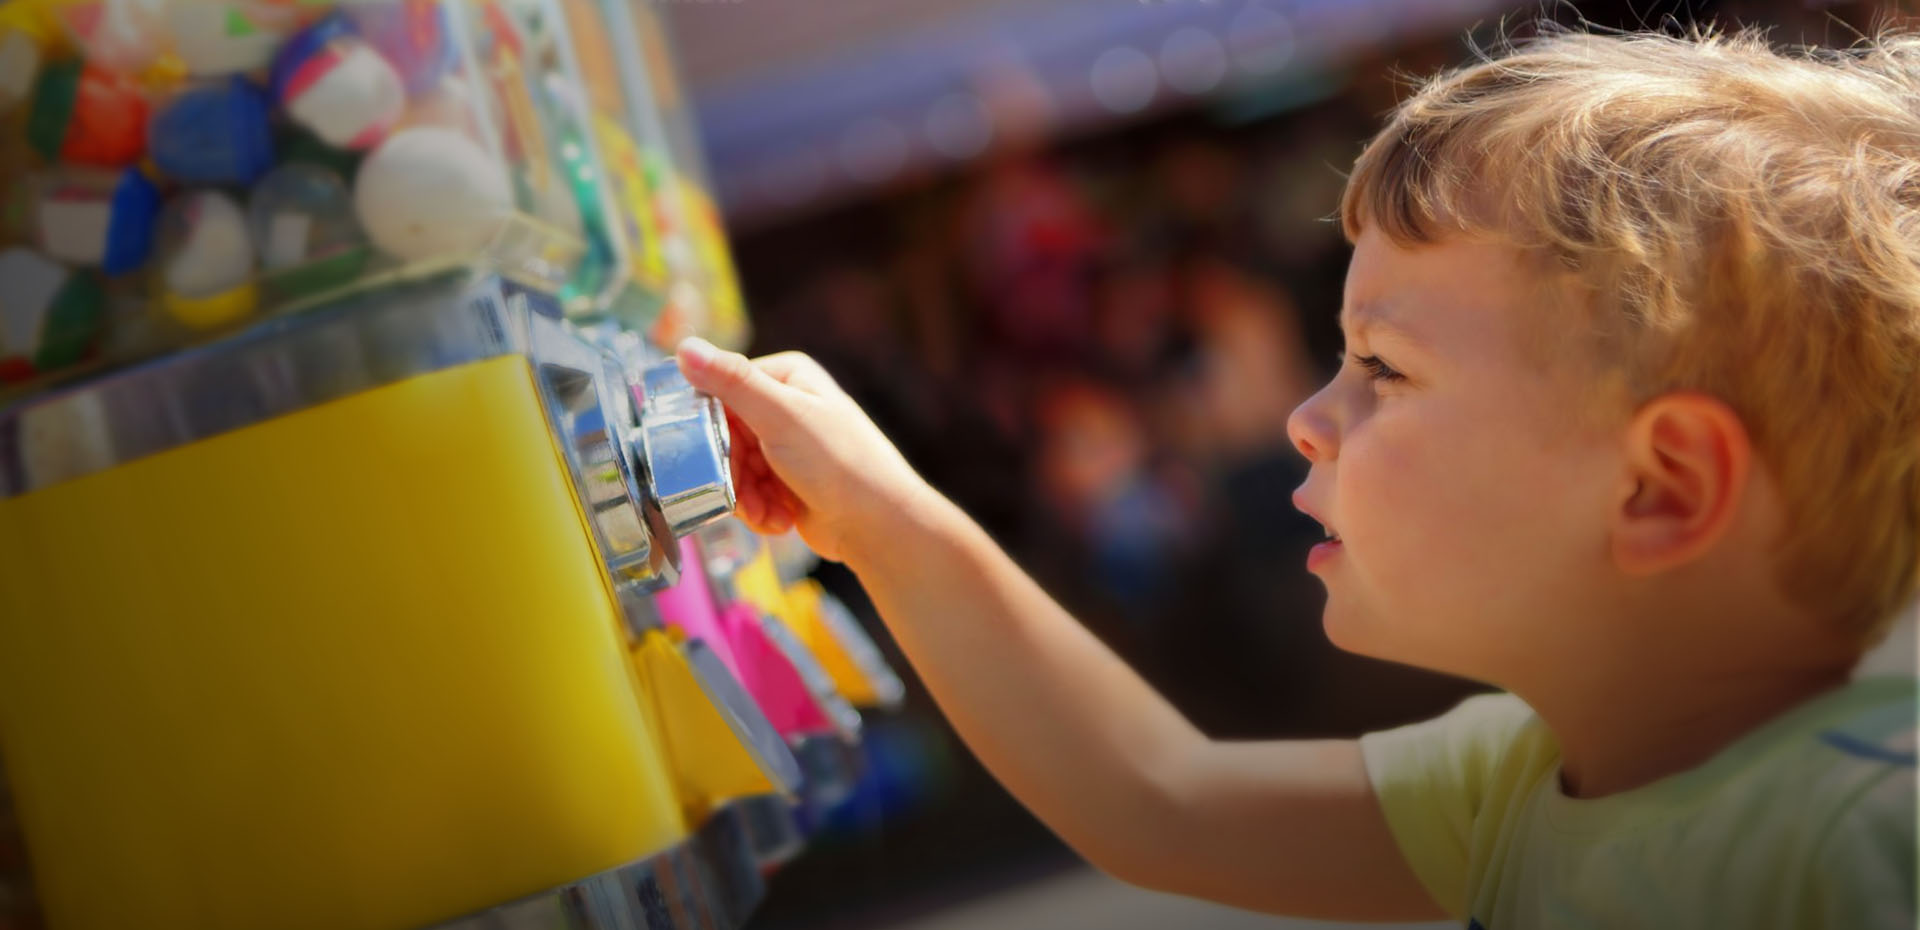 Installers Of Toys Vending Machines For Shopping Centres Loughbrough